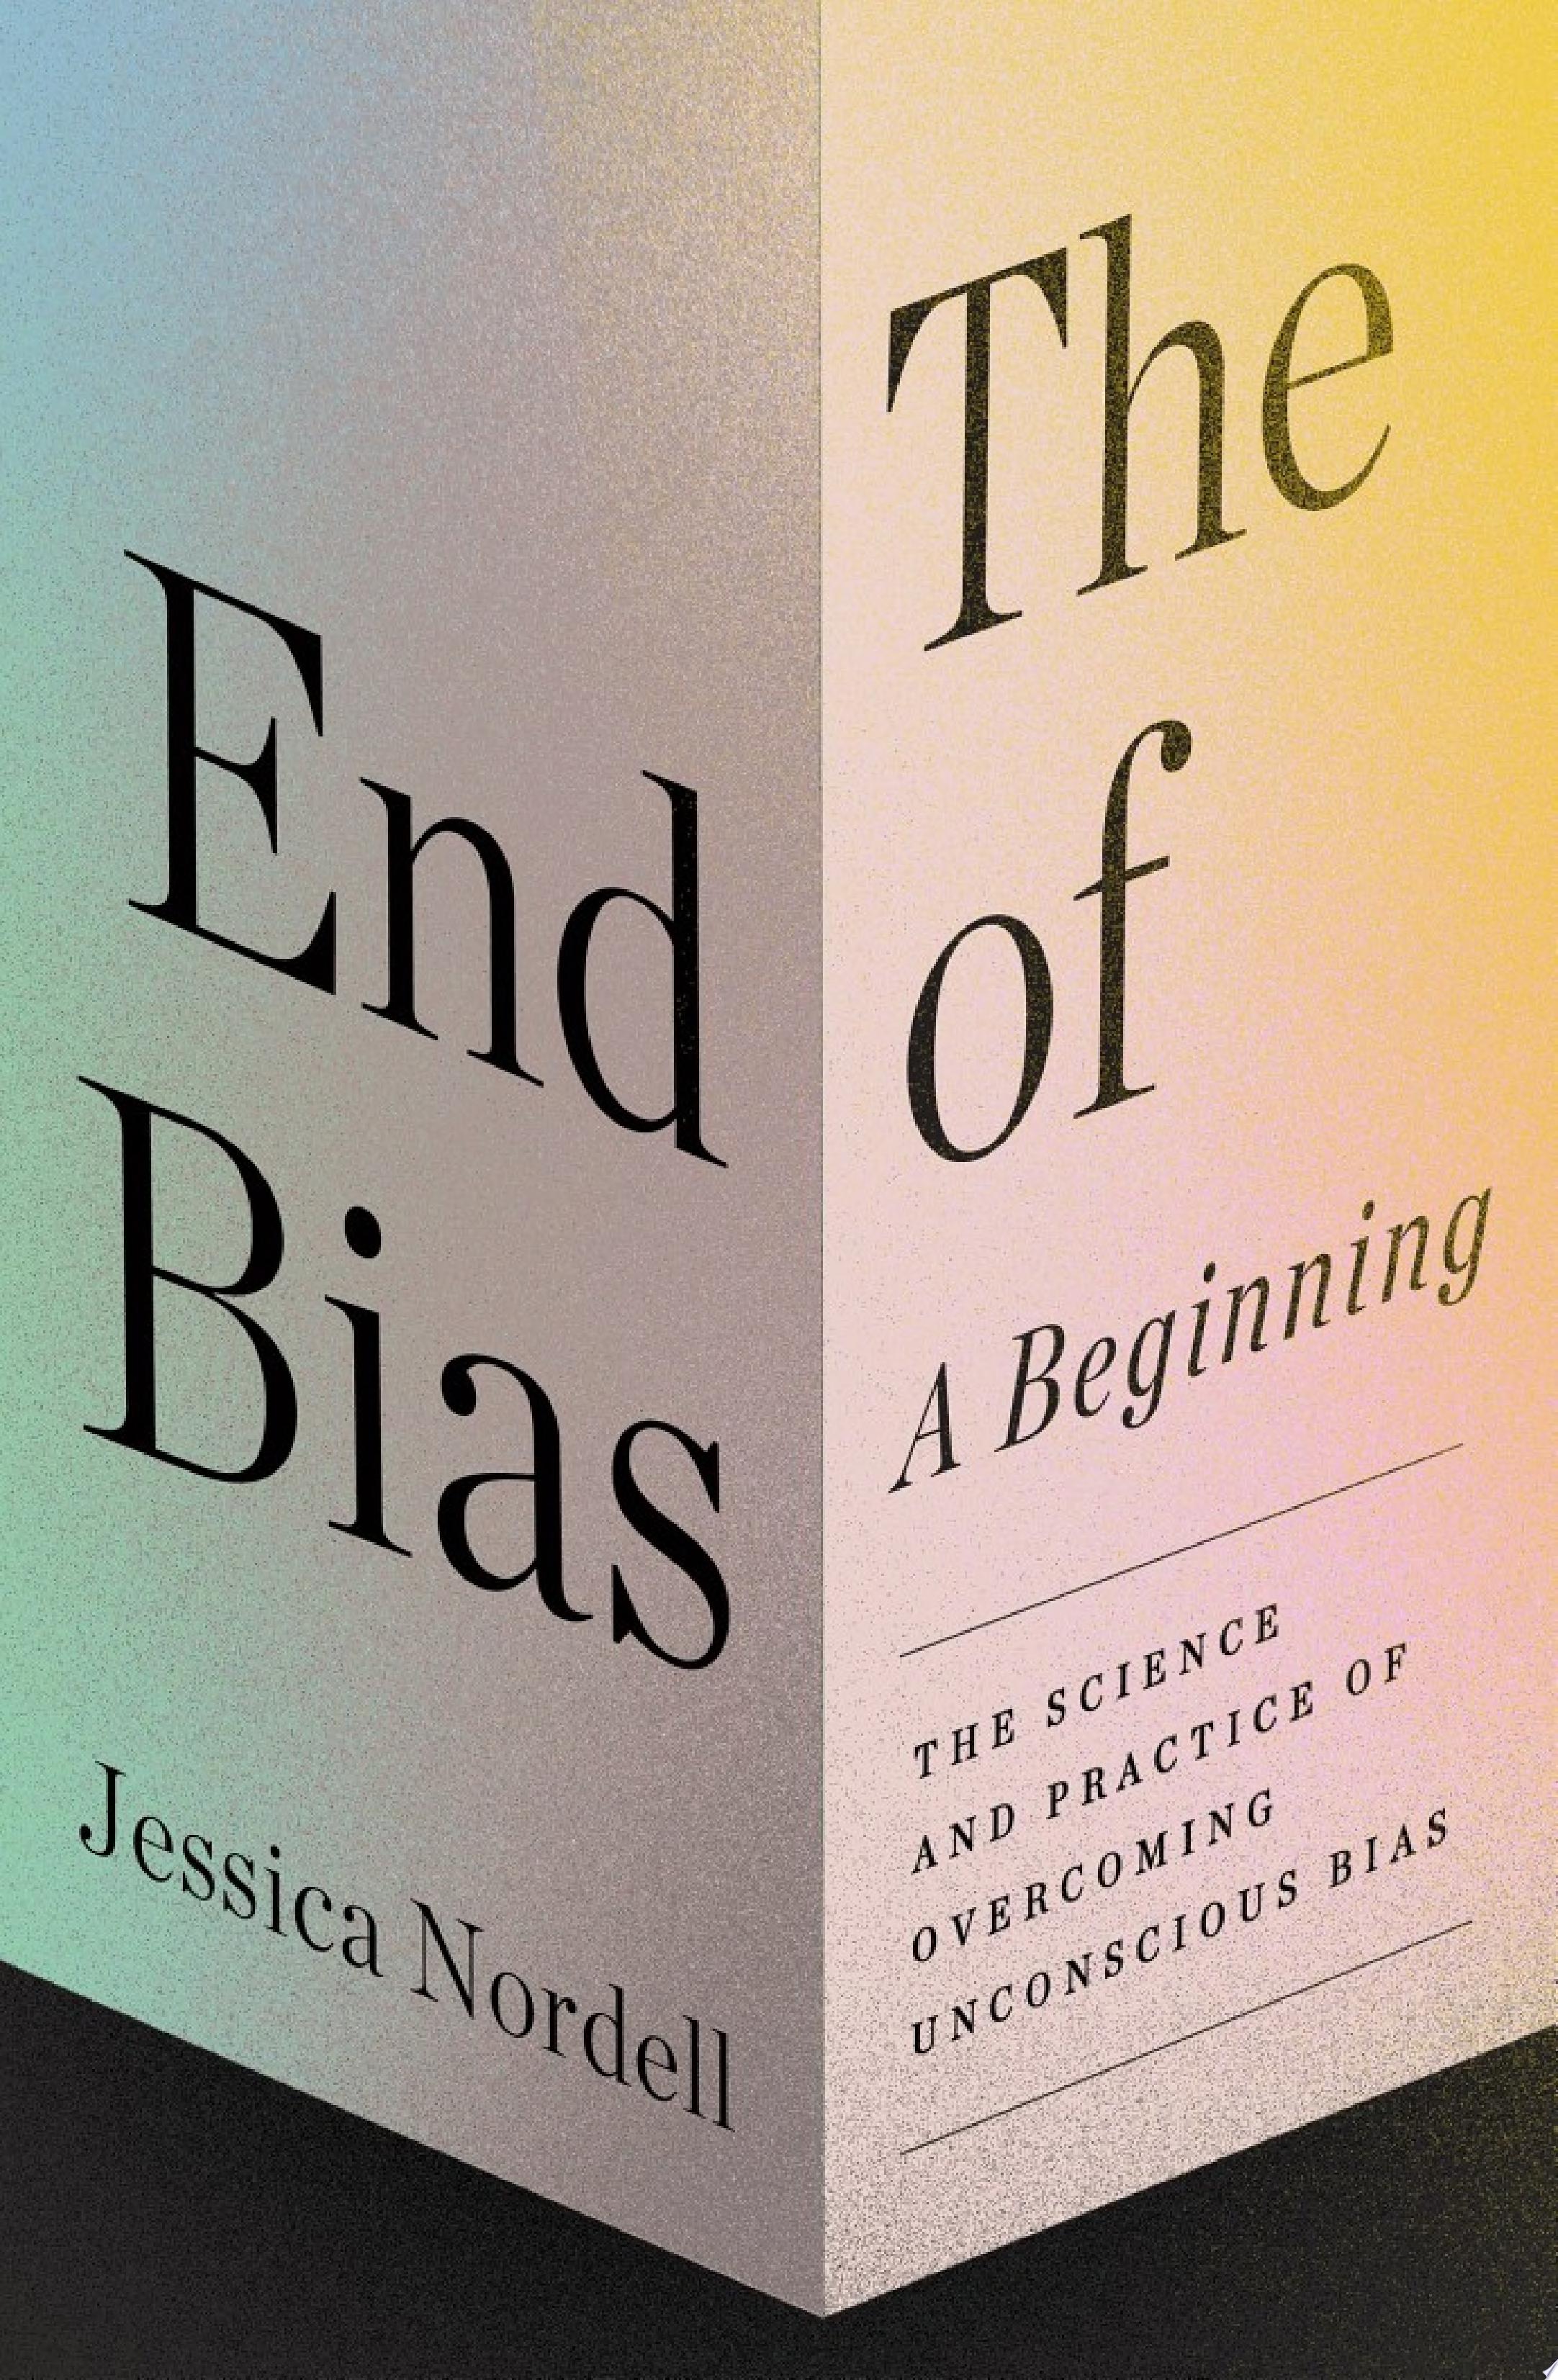 Image for "The End of Bias: A Beginning"